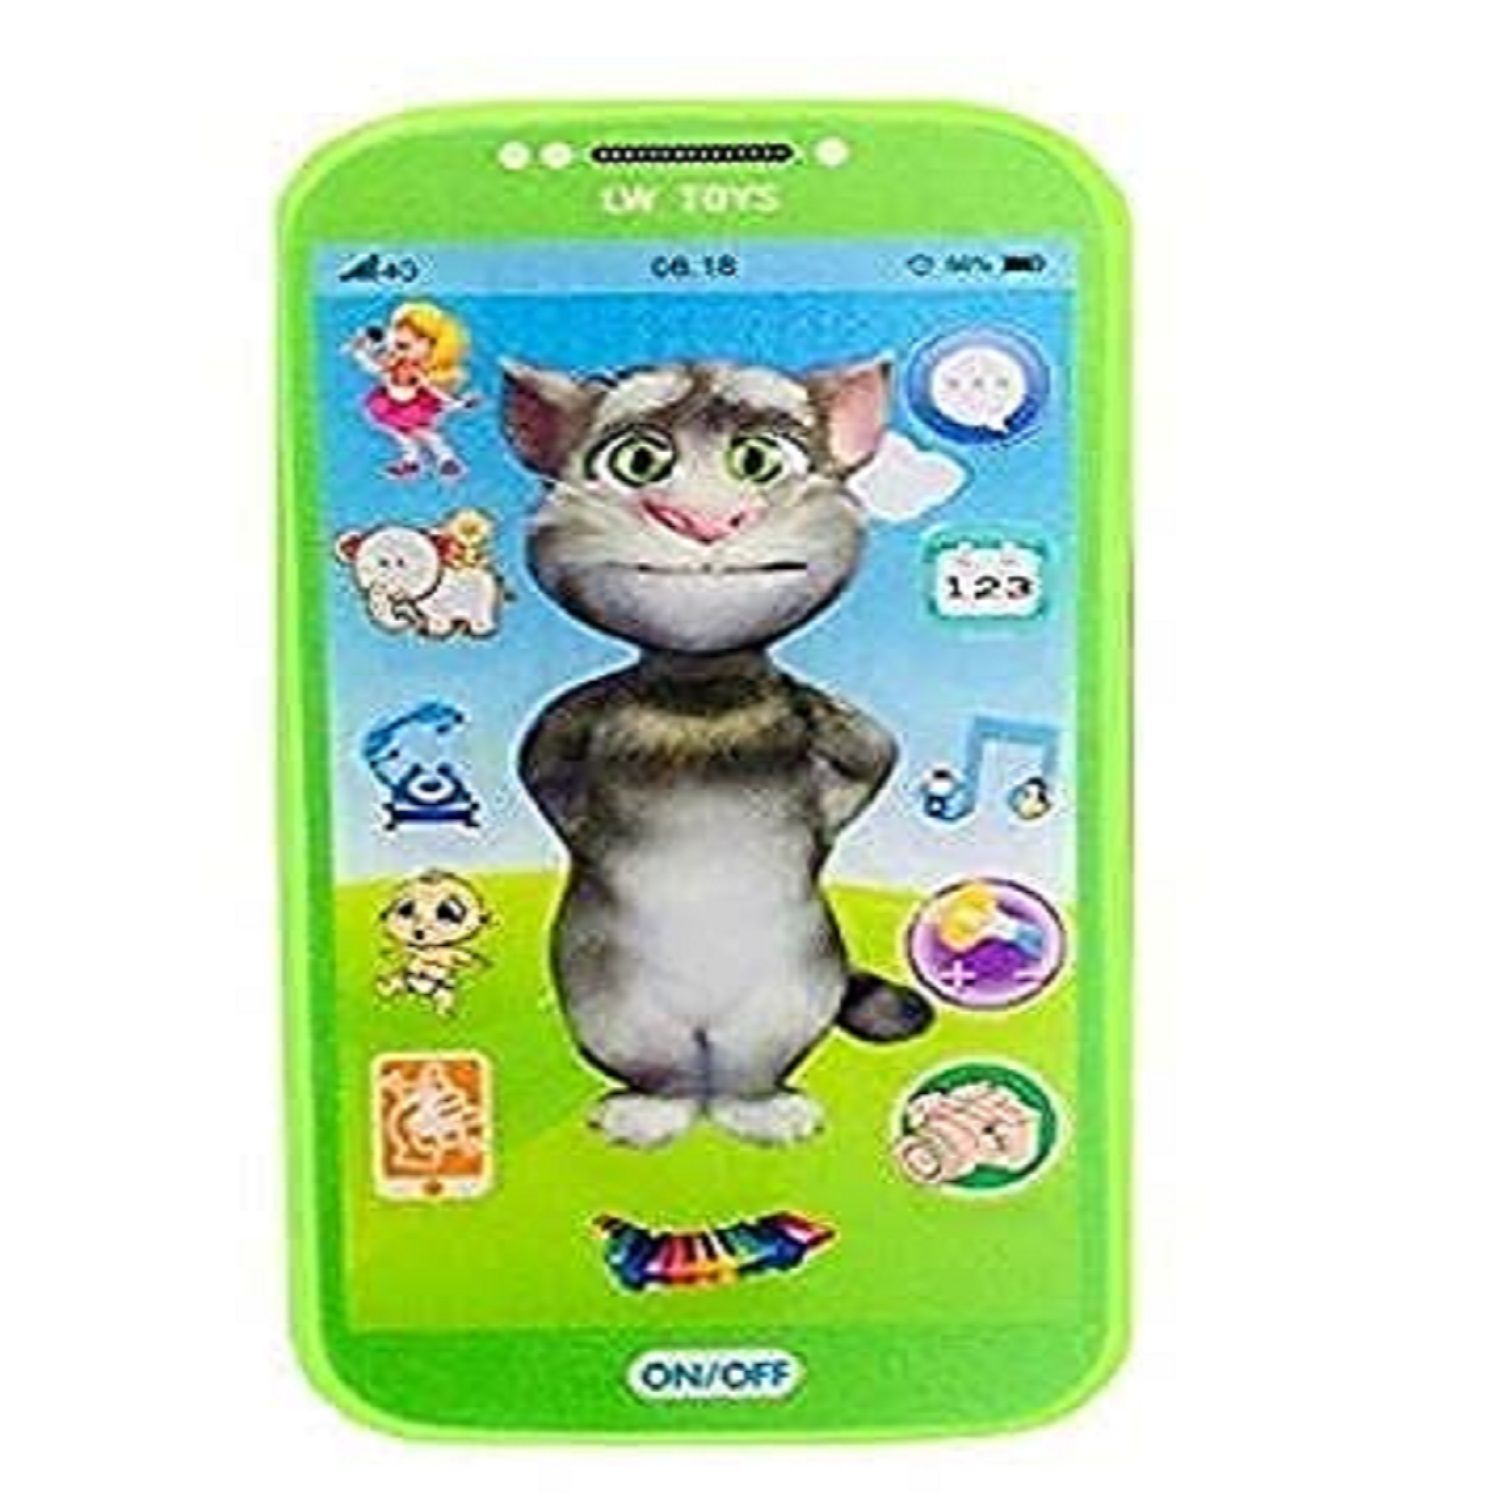     			My Talking First Learning Kids Mobile Smartphone with Touch Screen and Multiple Sound Effects, Along with Neck Holder for Boys & Girls (Tom Cat)